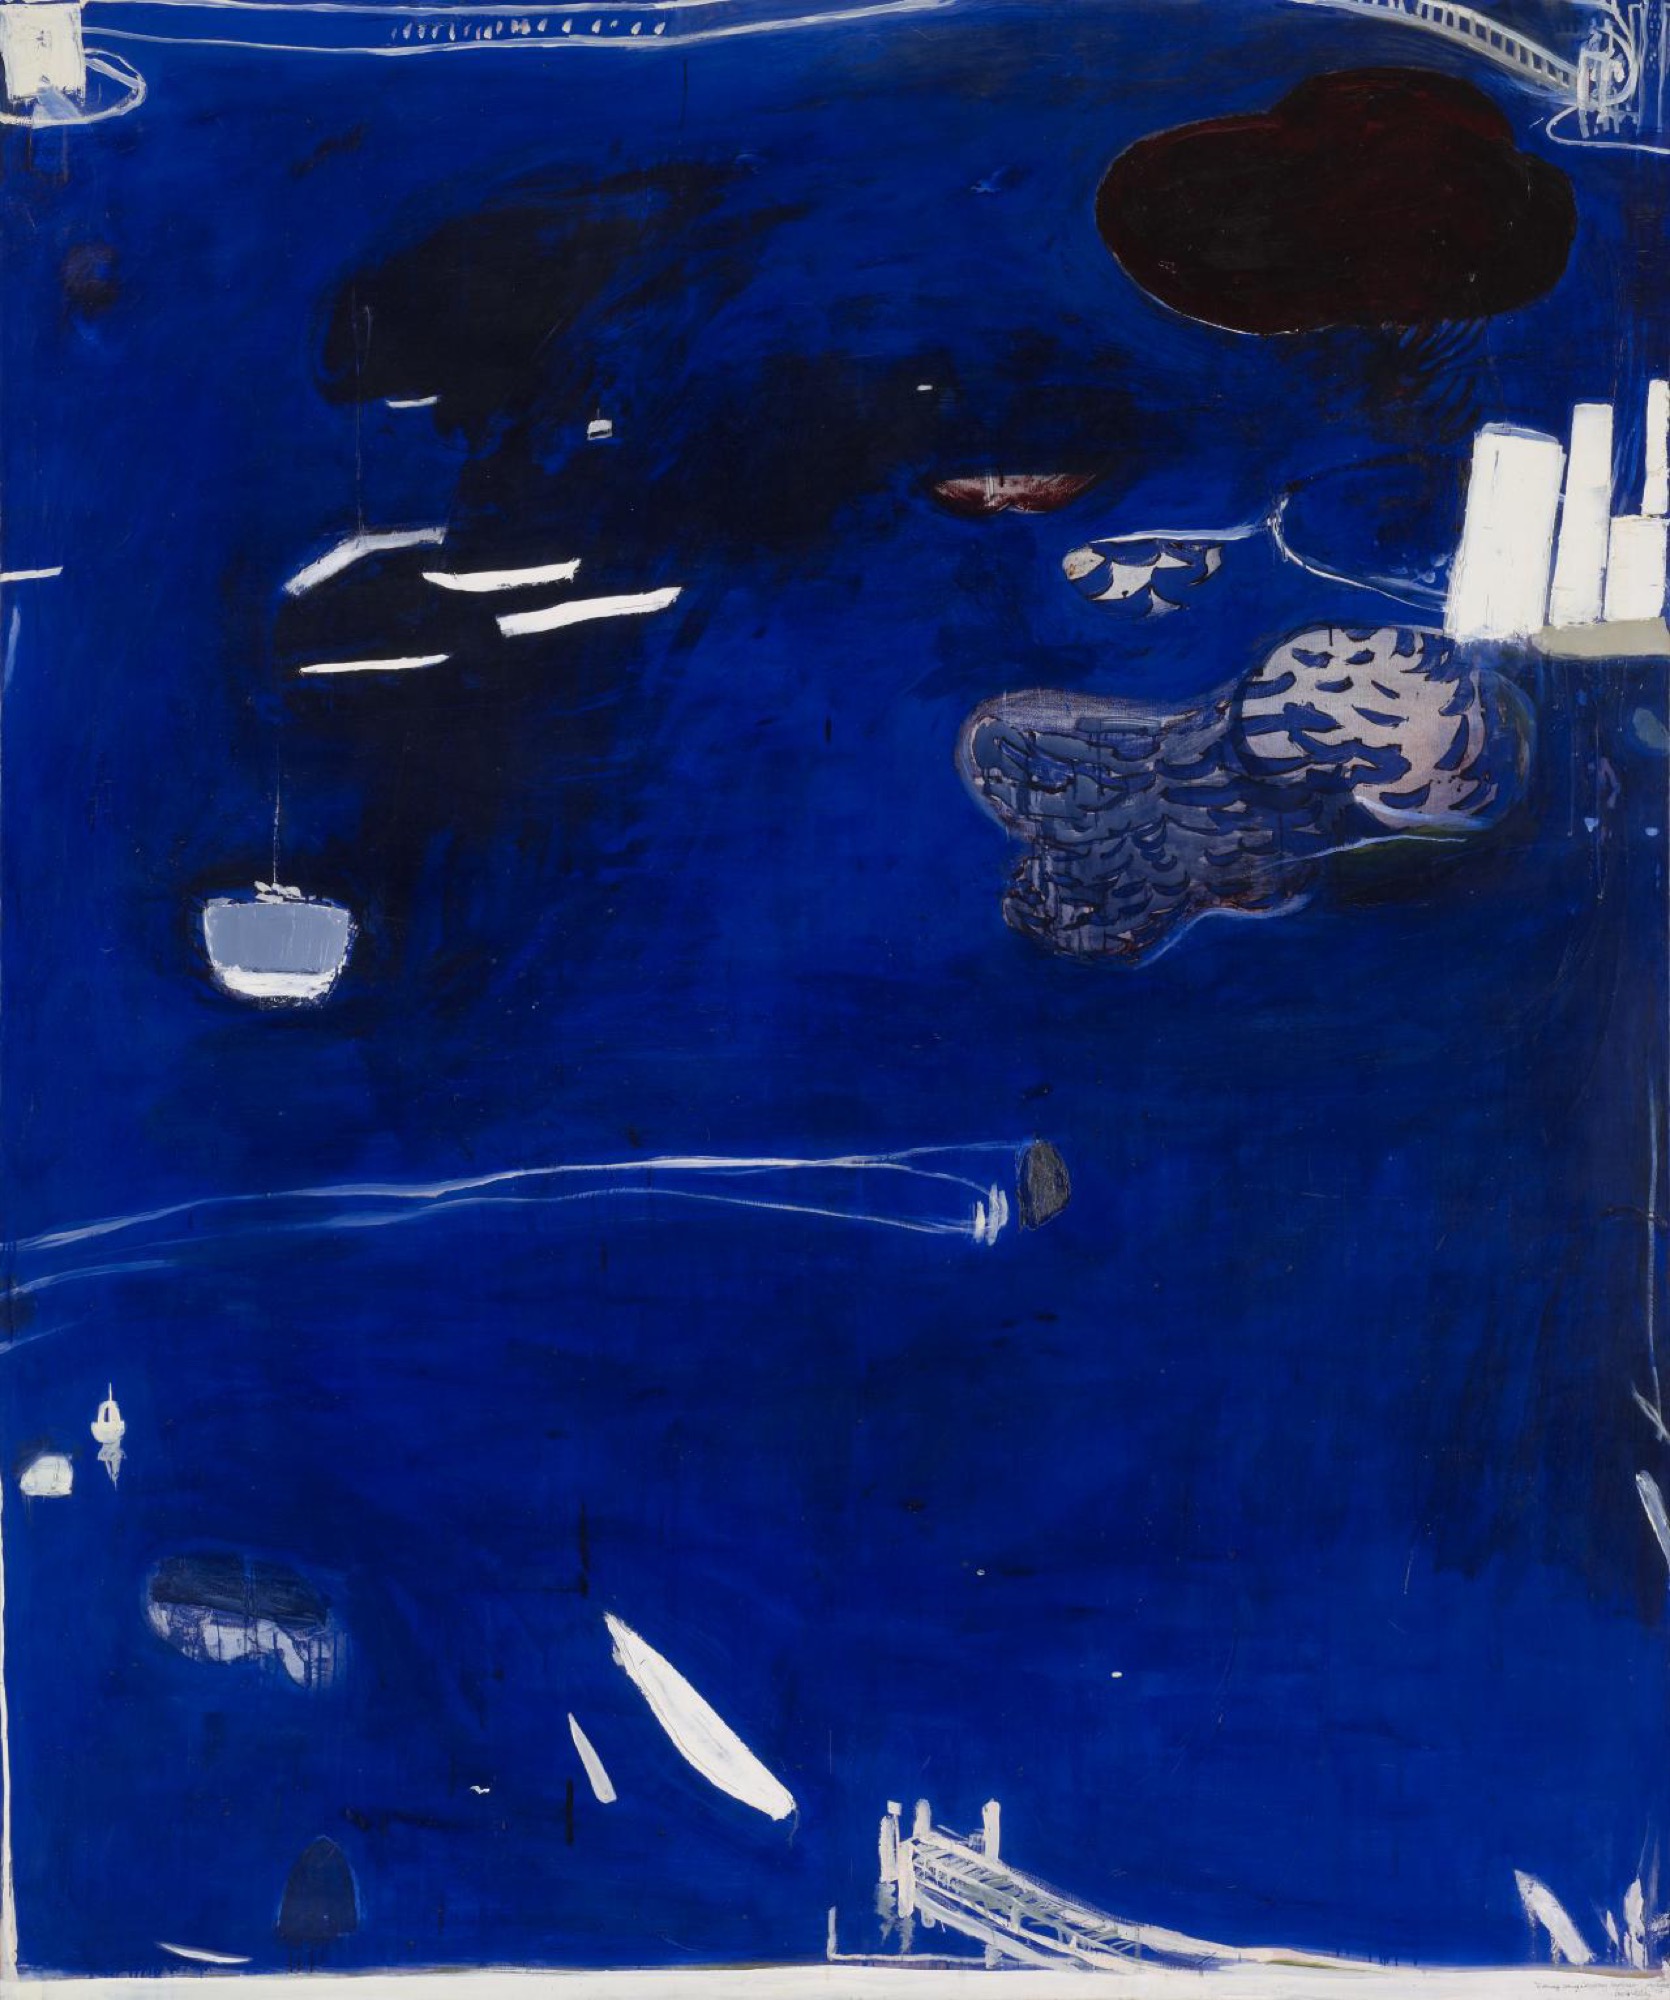 Brett WHITELEY, <em>Evening coming in on Sydney Harbour</em>, 1975, oil on cotton on canvas, 228.2 x 190.0 cm. National Gallery of Victoria, Melbourne, © Wendy Whiteley